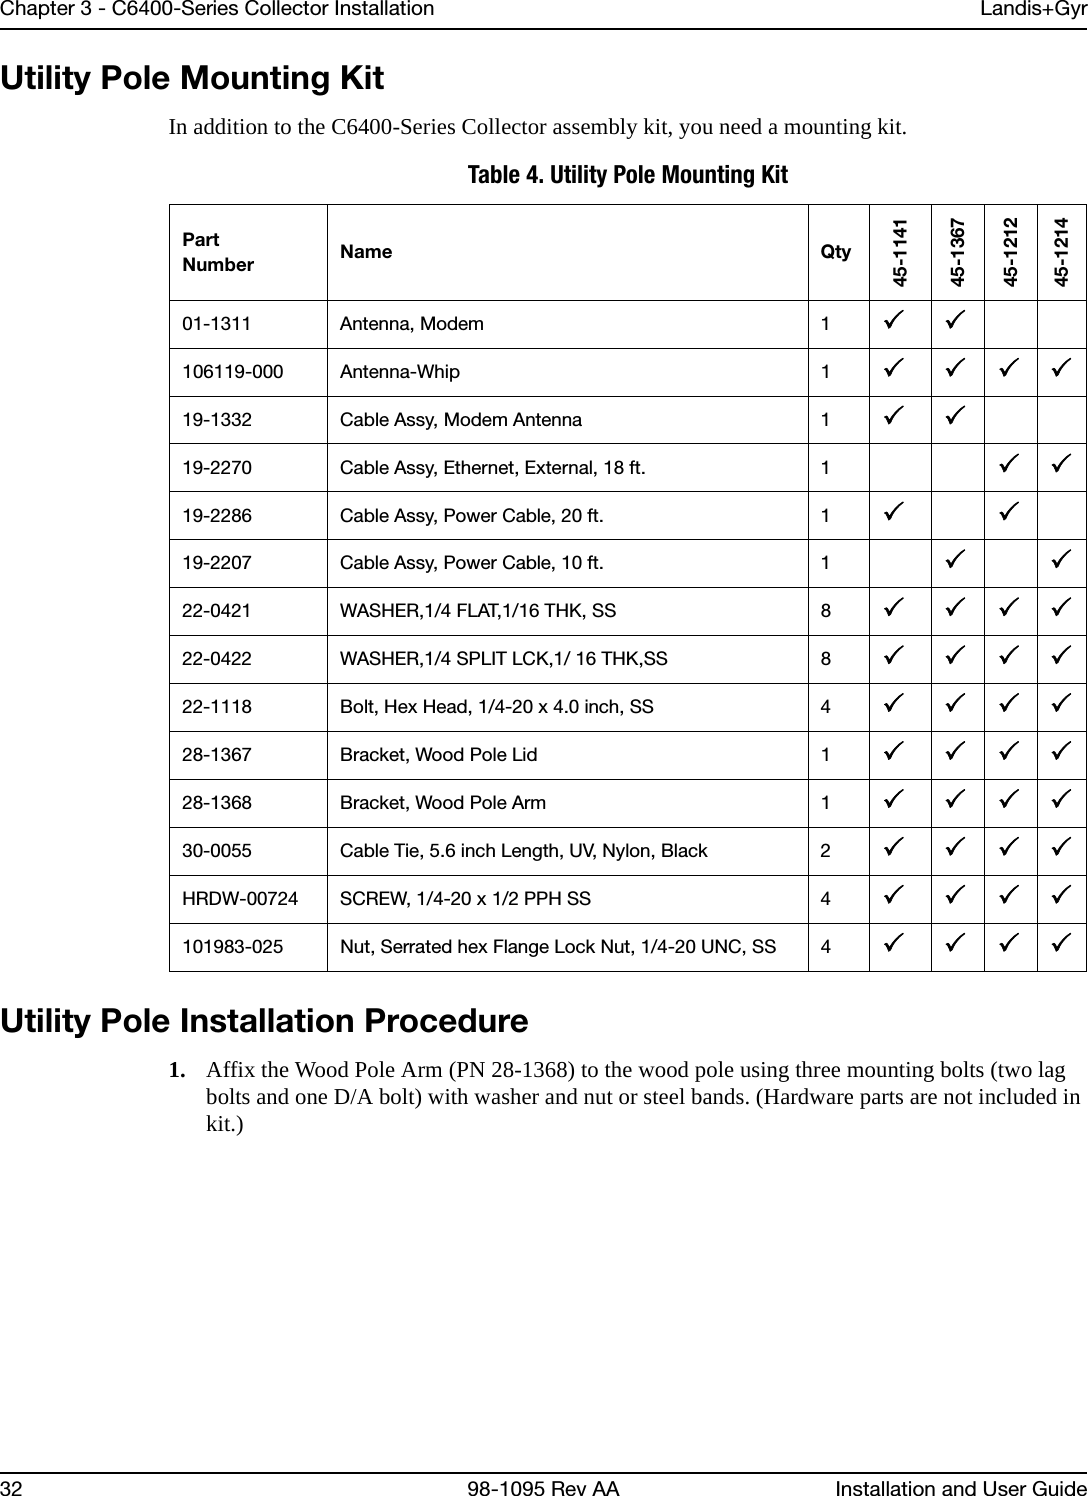 Chapter 3 - C6400-Series Collector Installation Landis+Gyr32 98-1095 Rev AA Installation and User GuideUtility Pole Mounting KitIn addition to the C6400-Series Collector assembly kit, you need a mounting kit.Utility Pole Installation Procedure1. Affix the Wood Pole Arm (PN 28-1368) to the wood pole using three mounting bolts (two lag bolts and one D/A bolt) with washer and nut or steel bands. (Hardware parts are not included in kit.)Table 4. Utility Pole Mounting KitPartNumber Name Qty45-114145-136745-121245-121401-1311 Antenna, Modem 1 106119-000 Antenna-Whip 1 19-1332 Cable Assy, Modem Antenna 1 19-2270 Cable Assy, Ethernet, External, 18 ft. 1 19-2286 Cable Assy, Power Cable, 20 ft. 1 19-2207 Cable Assy, Power Cable, 10 ft. 1 22-0421 WASHER,1/4 FLAT,1/16 THK, SS 8 22-0422 WASHER,1/4 SPLIT LCK,1/ 16 THK,SS 8 22-1118 Bolt, Hex Head, 1/4-20 x 4.0 inch, SS 4 28-1367 Bracket, Wood Pole Lid 1 28-1368 Bracket, Wood Pole Arm 1 30-0055 Cable Tie, 5.6 inch Length, UV, Nylon, Black 2 HRDW-00724 SCREW, 1/4-20 x 1/2 PPH SS 4 101983-025 Nut, Serrated hex Flange Lock Nut, 1/4-20 UNC, SS 4 